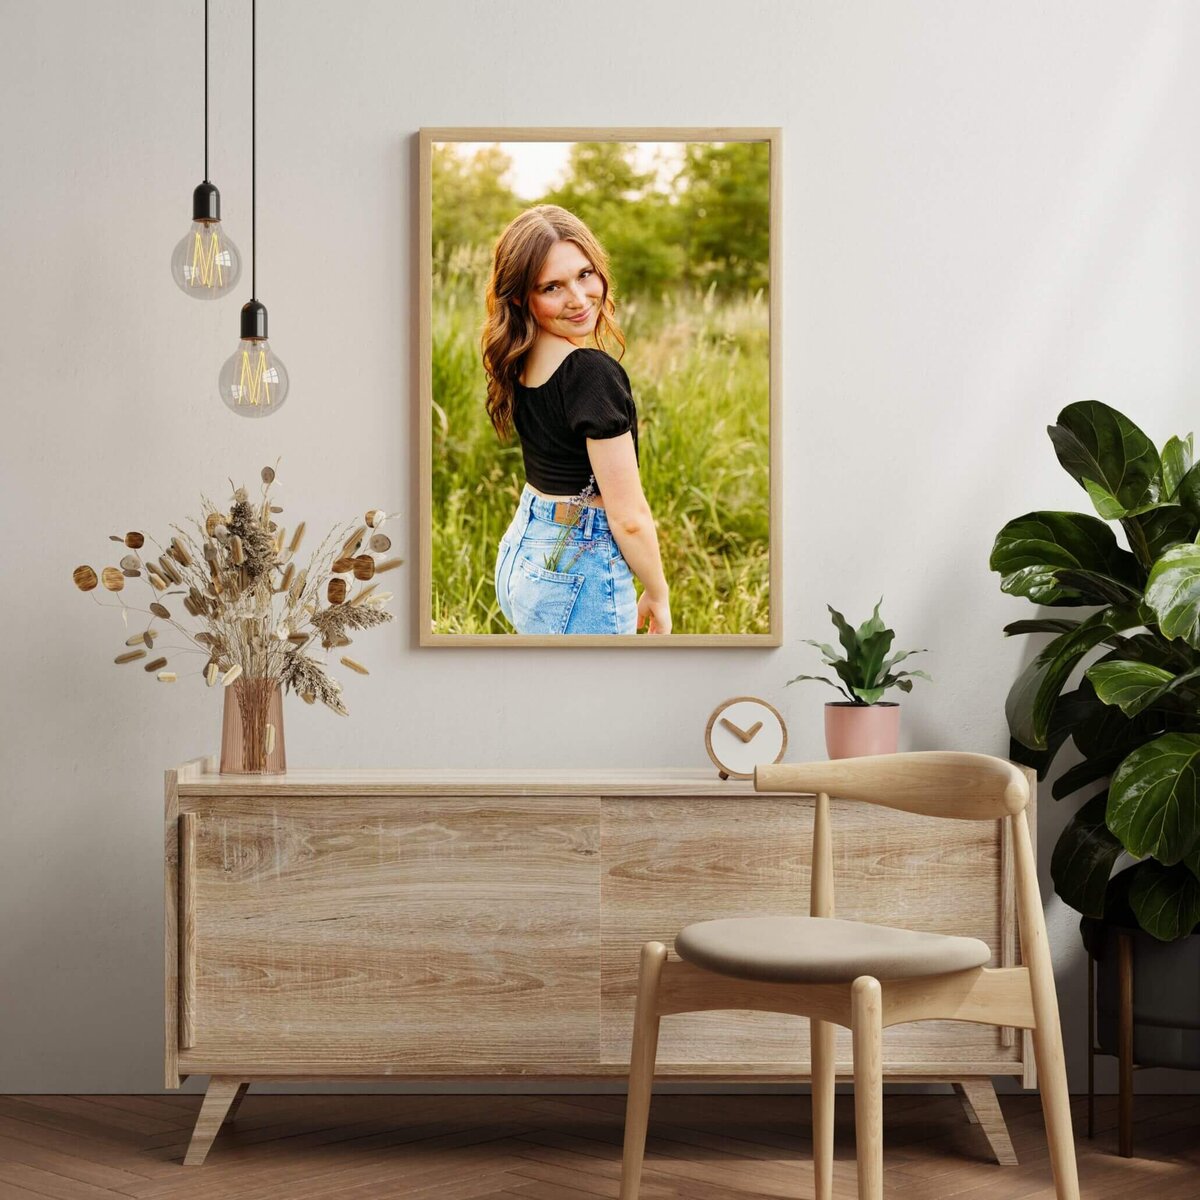 image of an entry way with a photo of a  female teenager hanging above a buffet